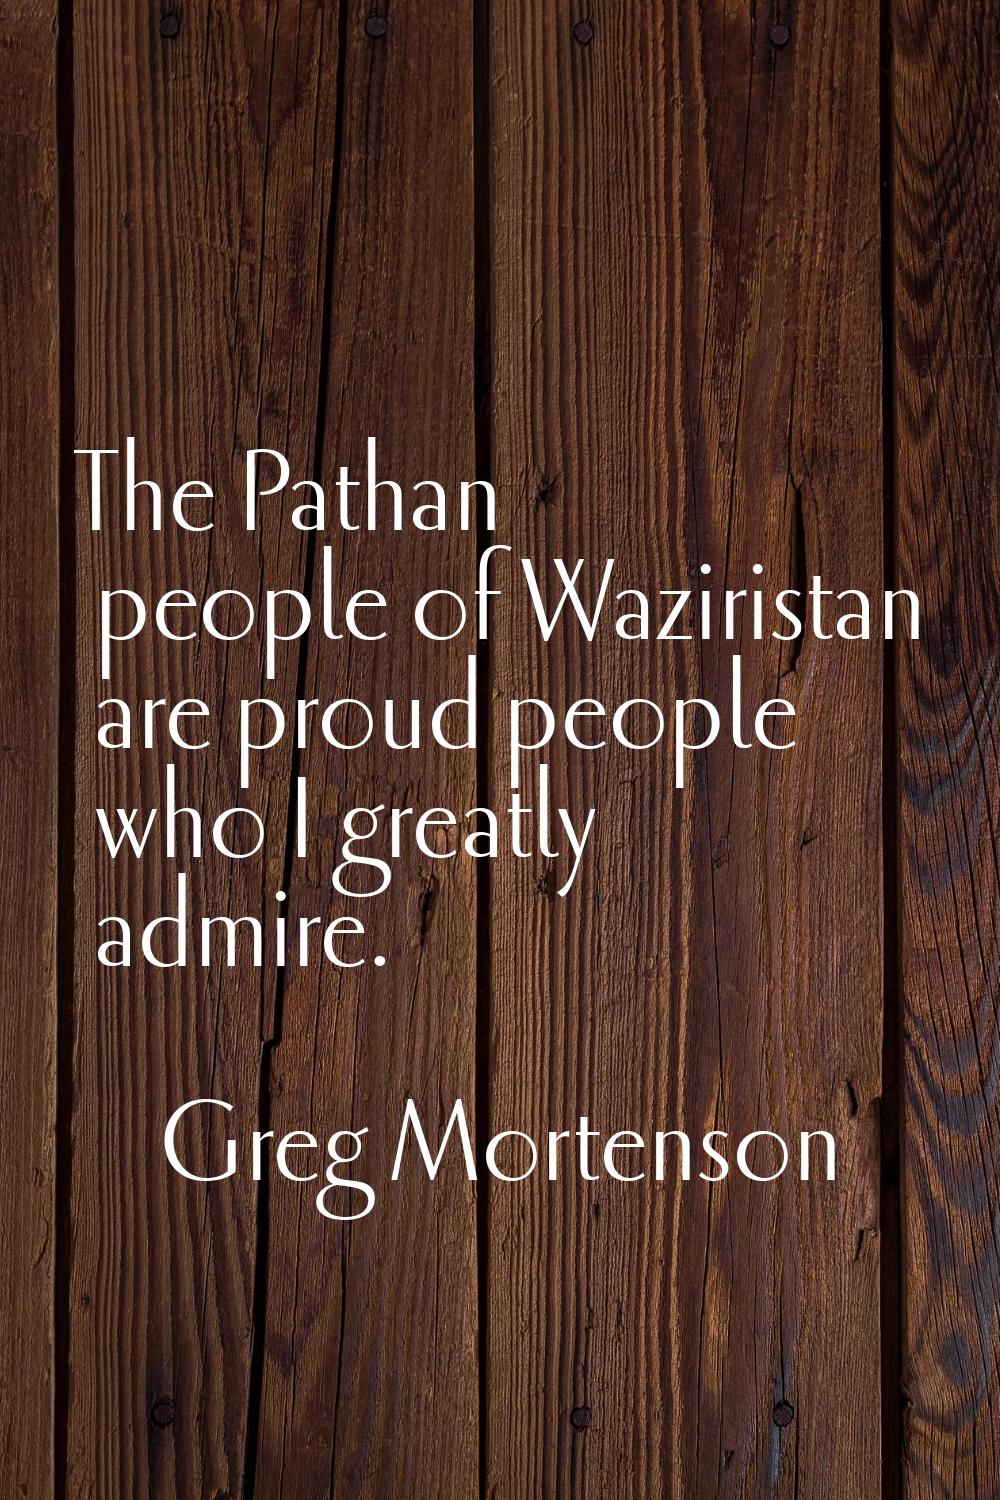 The Pathan people of Waziristan are proud people who I greatly admire.